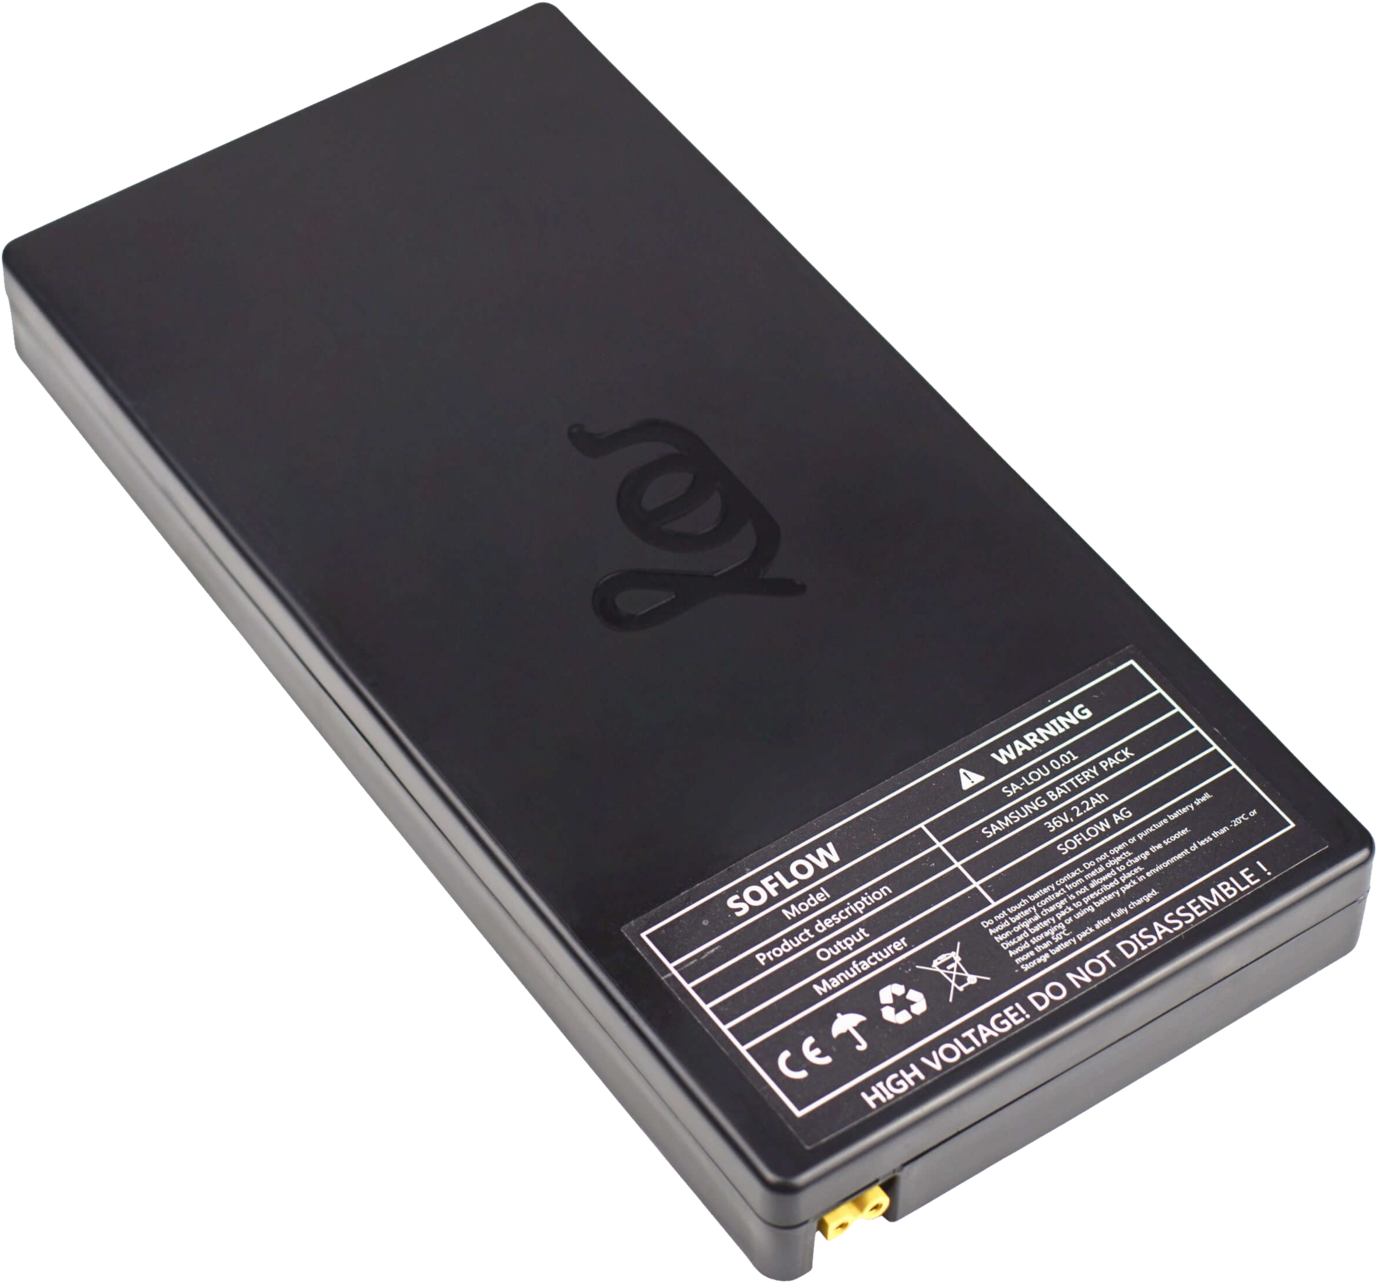 Lithium Ion Battery Pack PNG